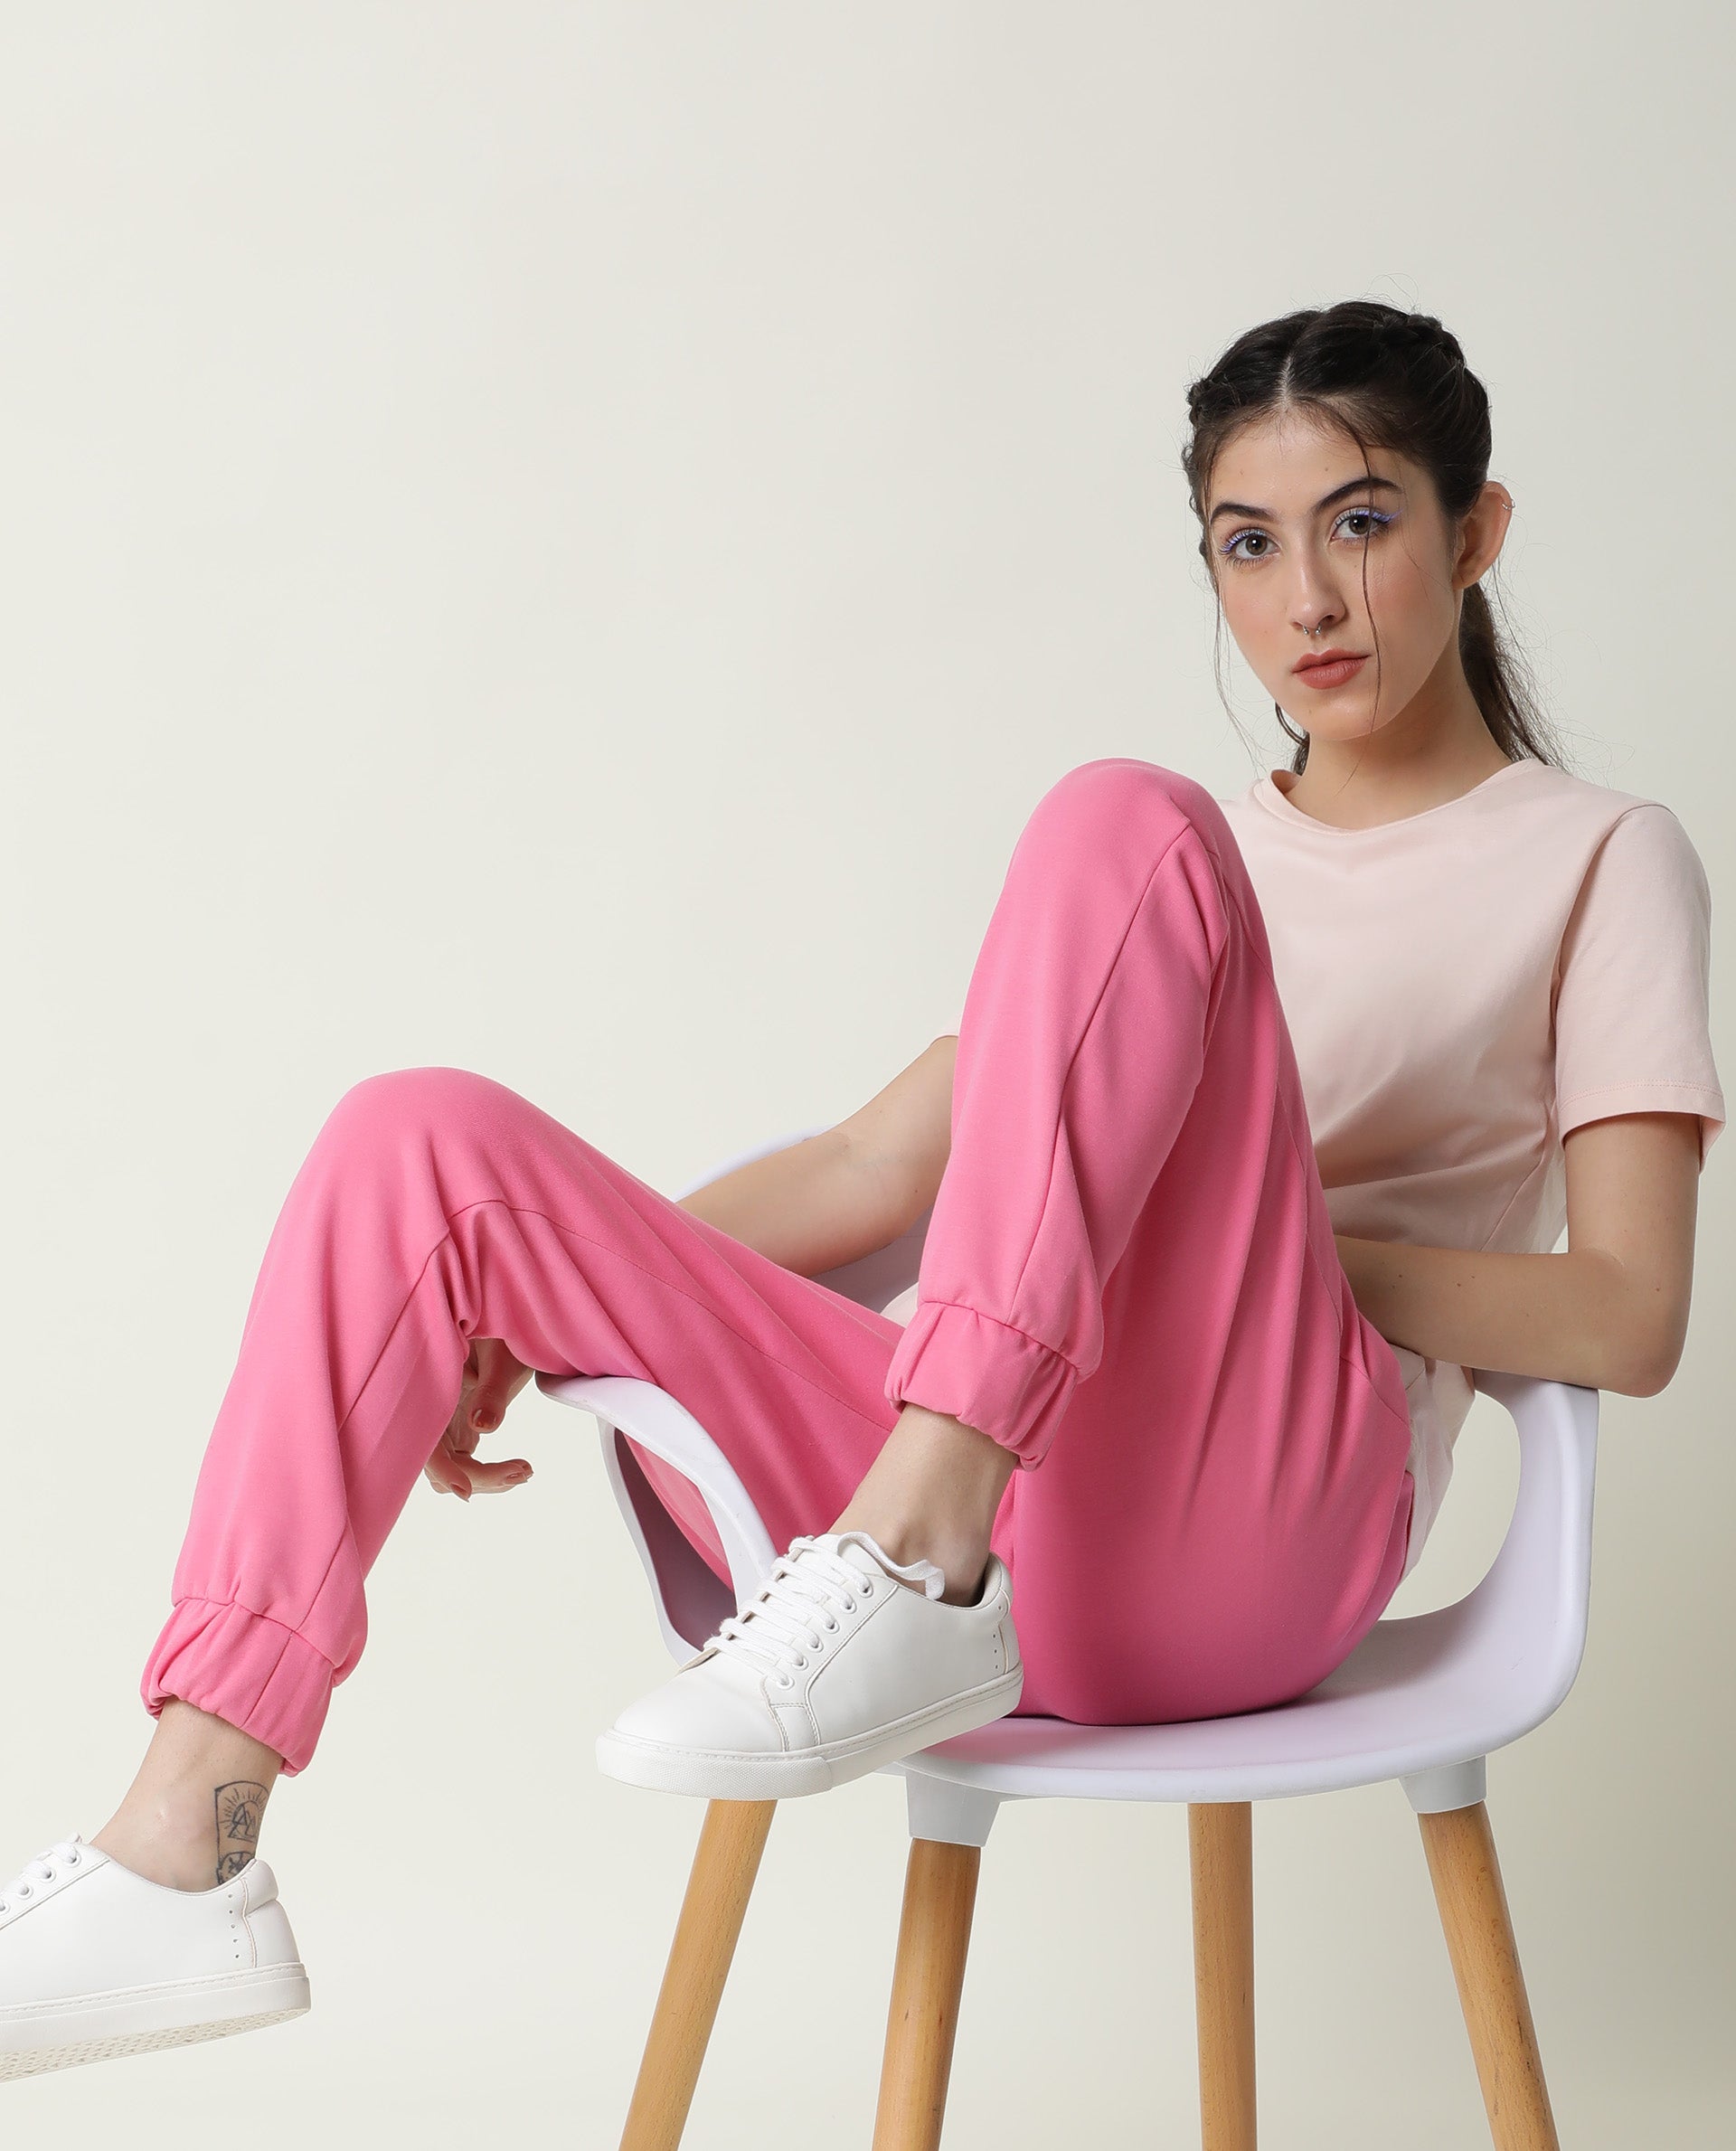 Buy Flame Pink Track Pant For Women 8907279396242